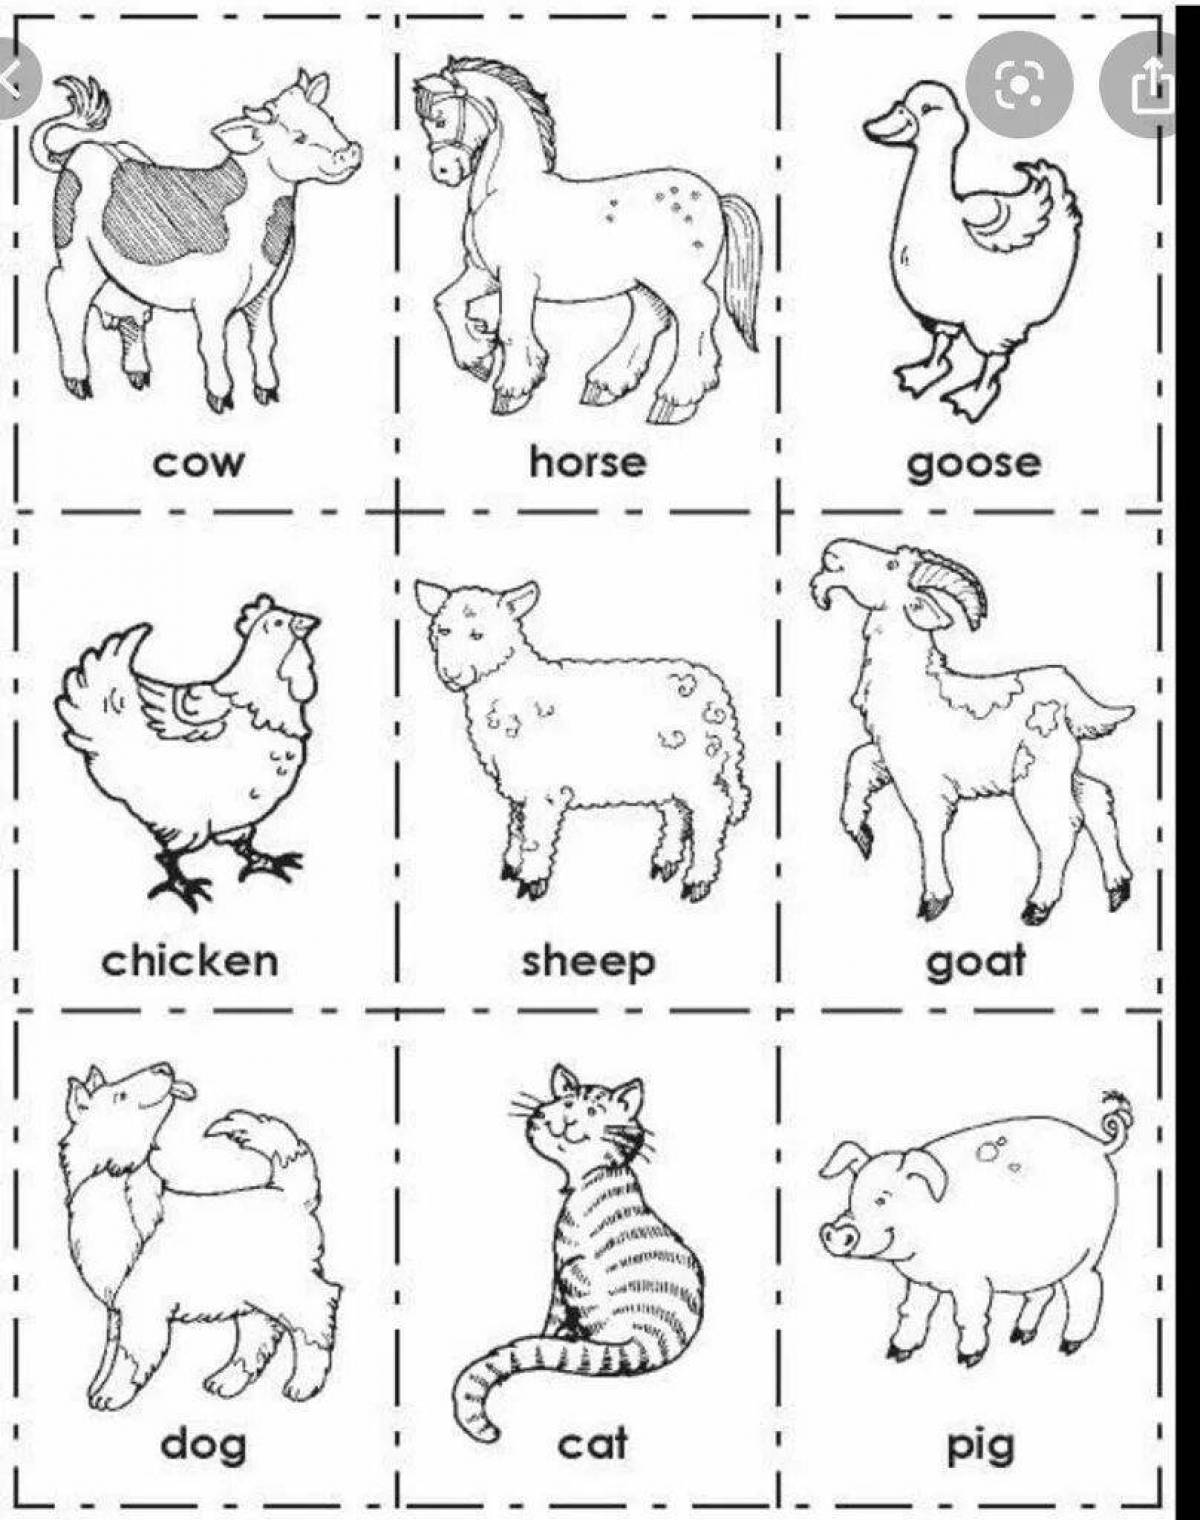 Perfect english animal coloring for students